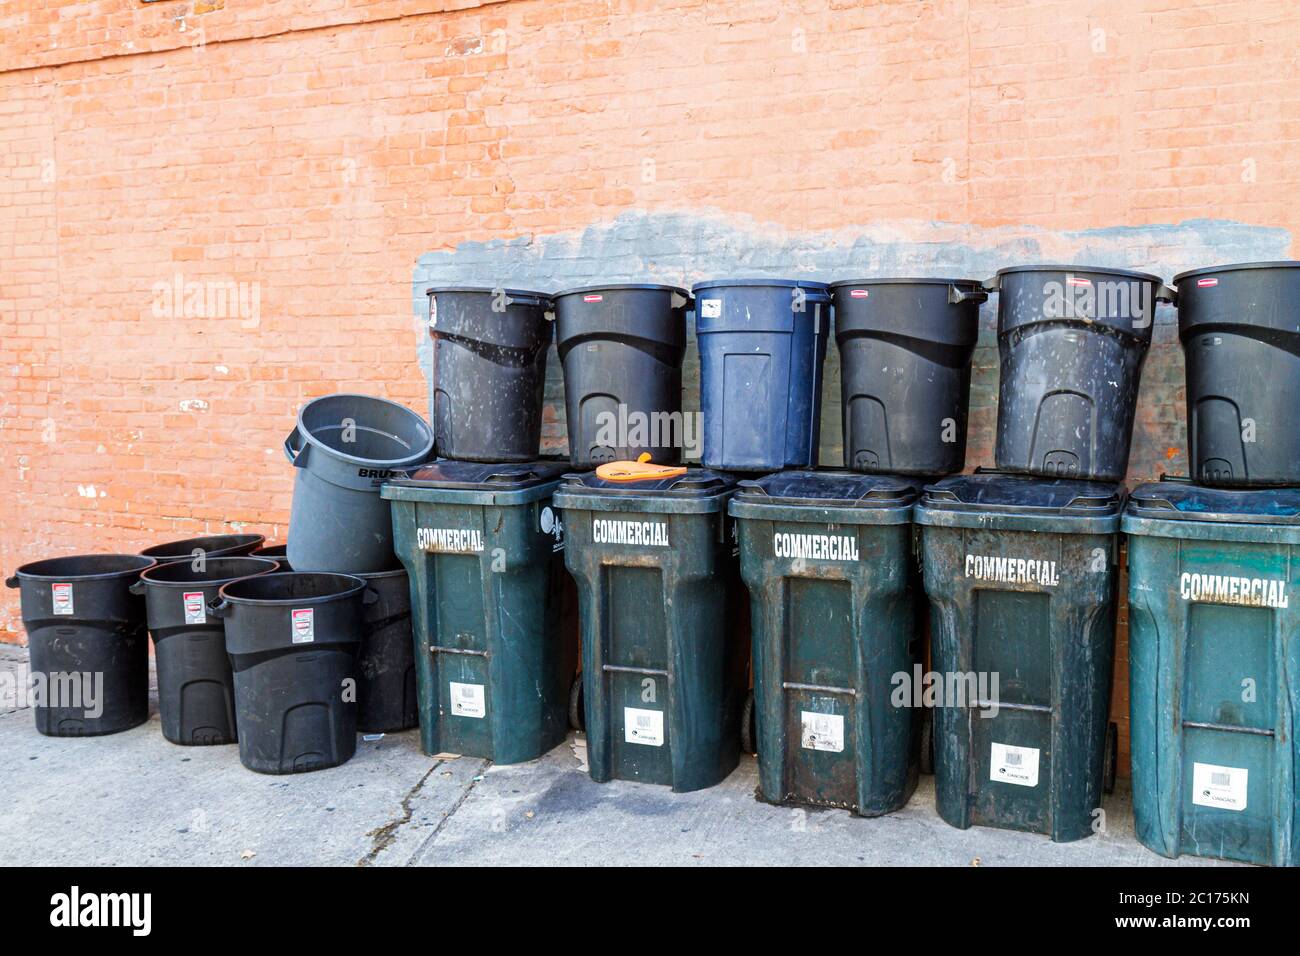 New Orleans Louisiana,Warehouse District,trash cans,bins,round container,commercial waste,brick wall,Rubbermaid,55 gallon Brute,plastic,rollout,heavy Stock Photo